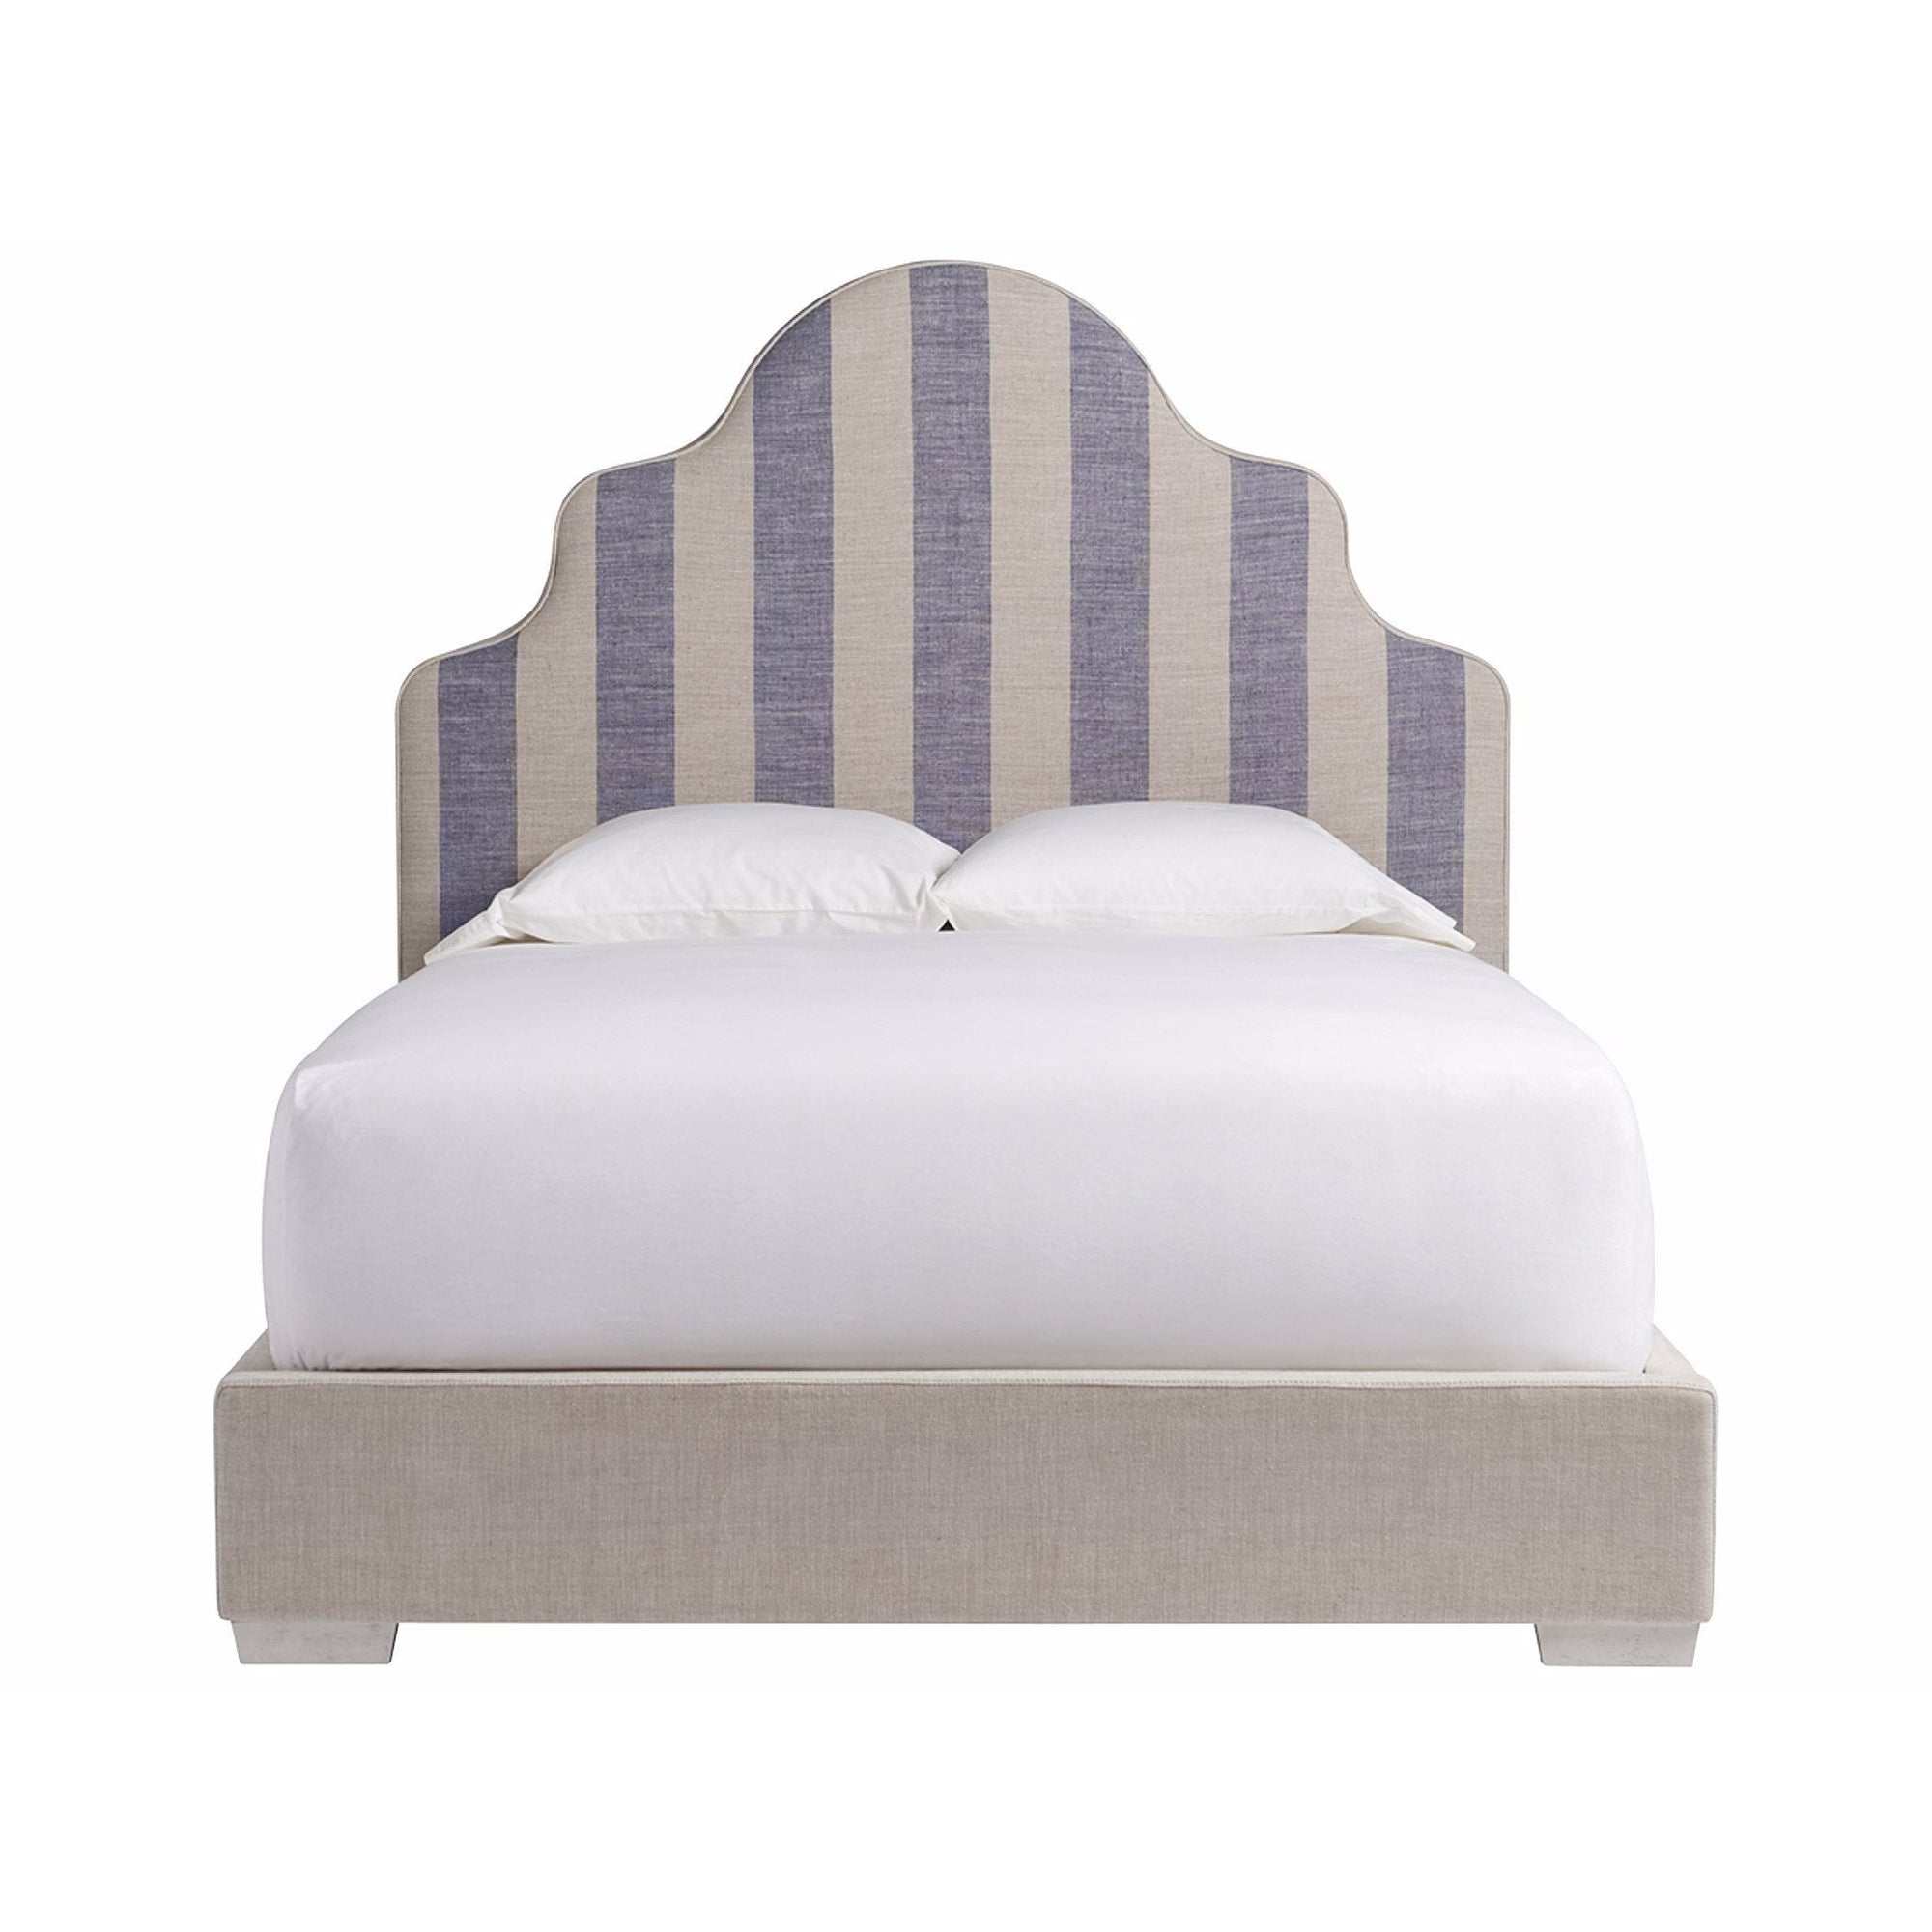 Sagamore Hill Bed Queen